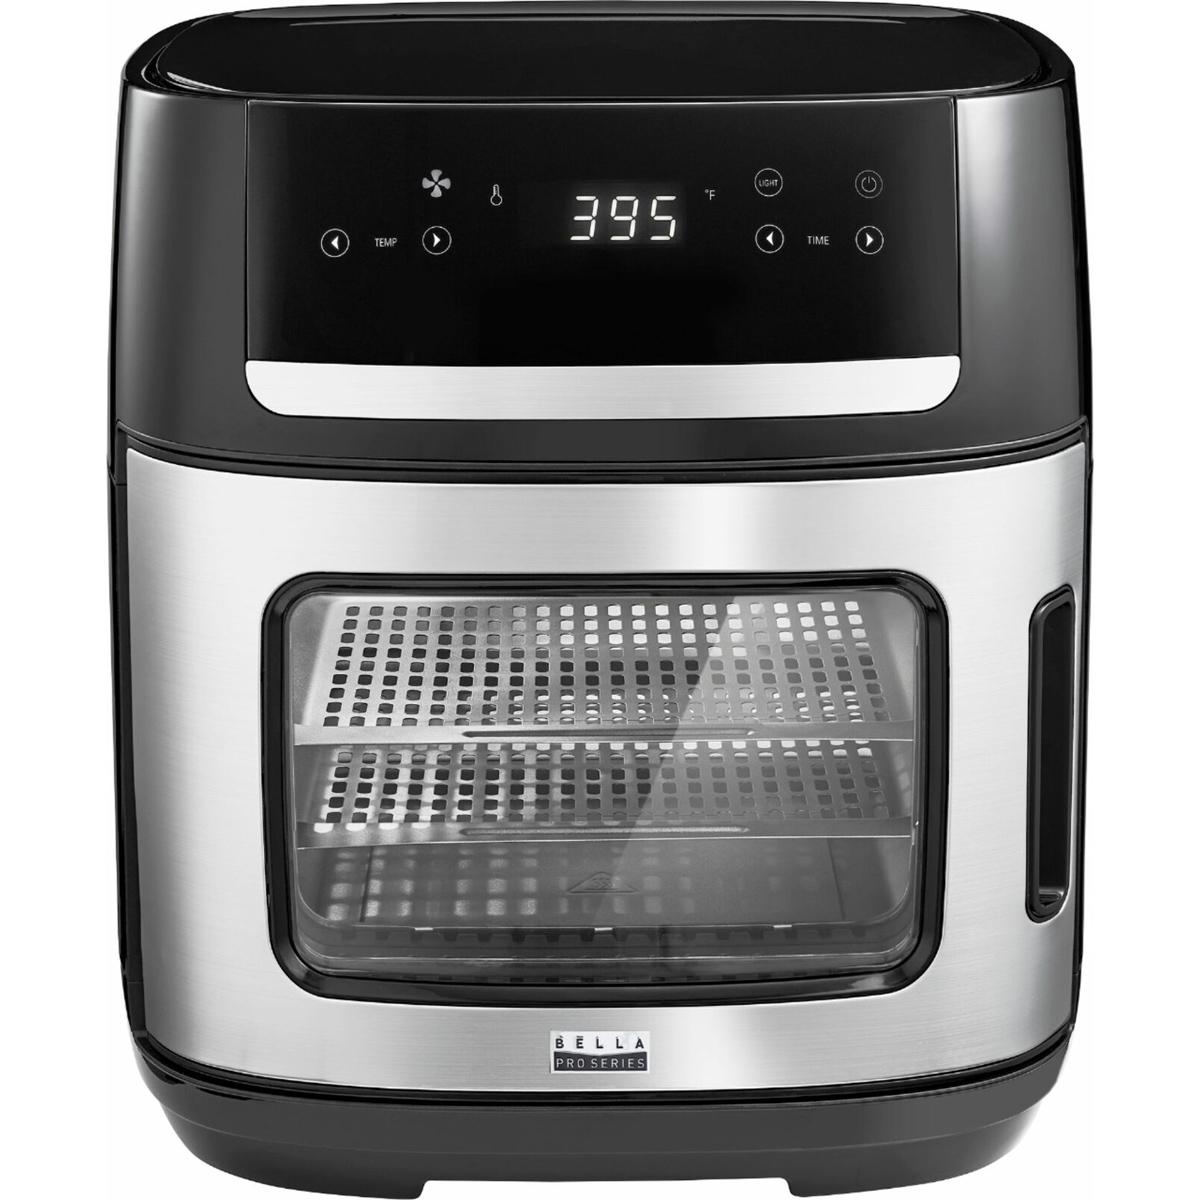 Bella Pro 4-Slice Convection Toaster Oven with Air Fryer for $59.99 Shipped